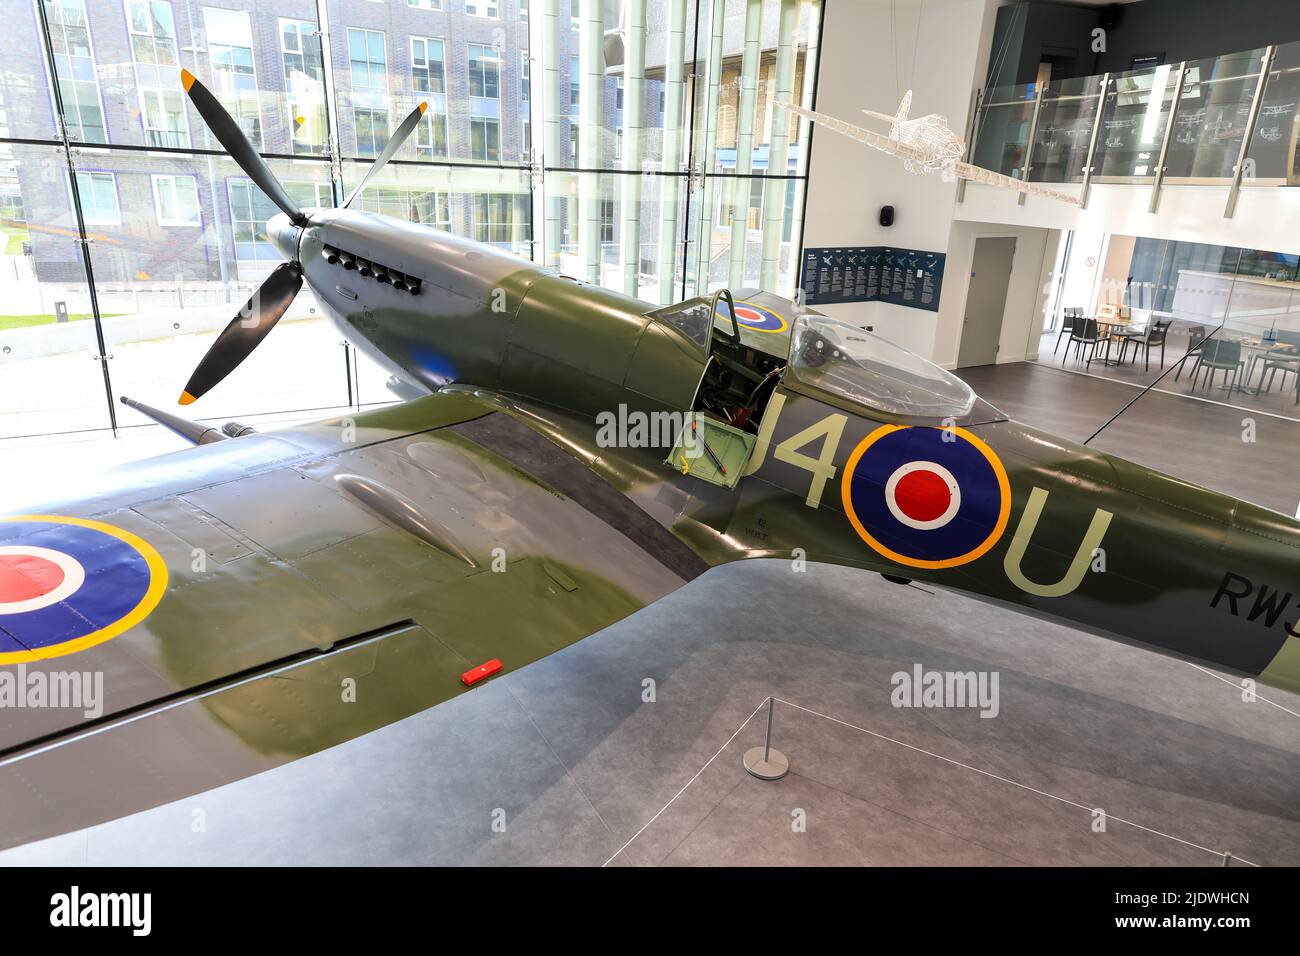 Spitfire RW388 aeroplane on display at the Potteries Museum and Art Gallery, Hanley, Stoke-on-Trent, Staffs, England, UK Stock Photo